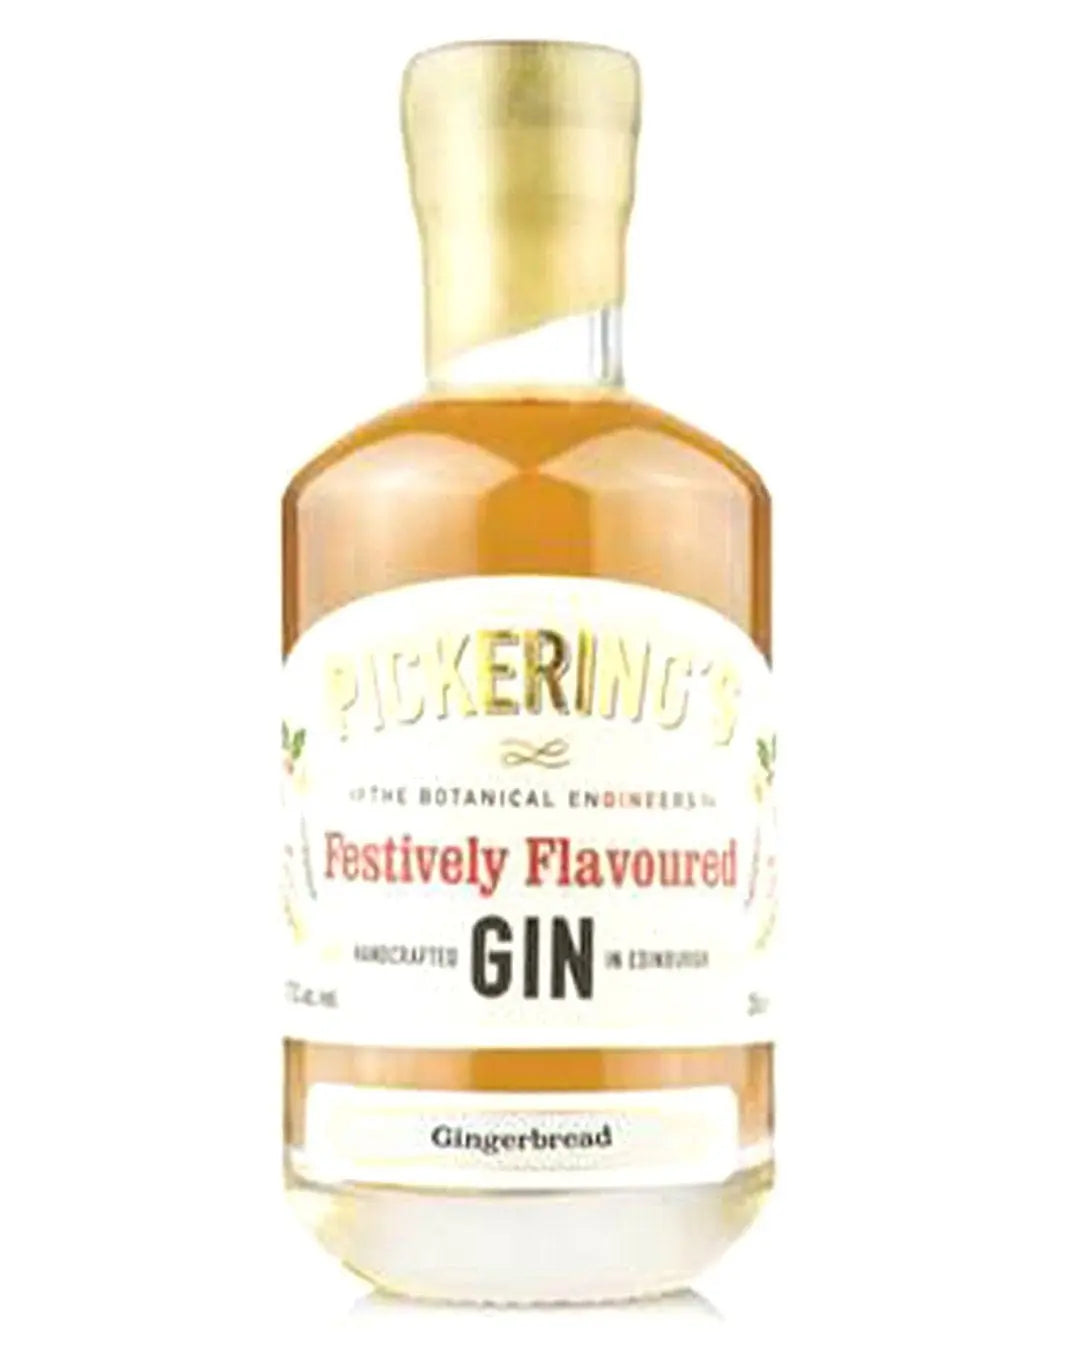 Pickering's Gingerbread Gin, 20 cl Gin